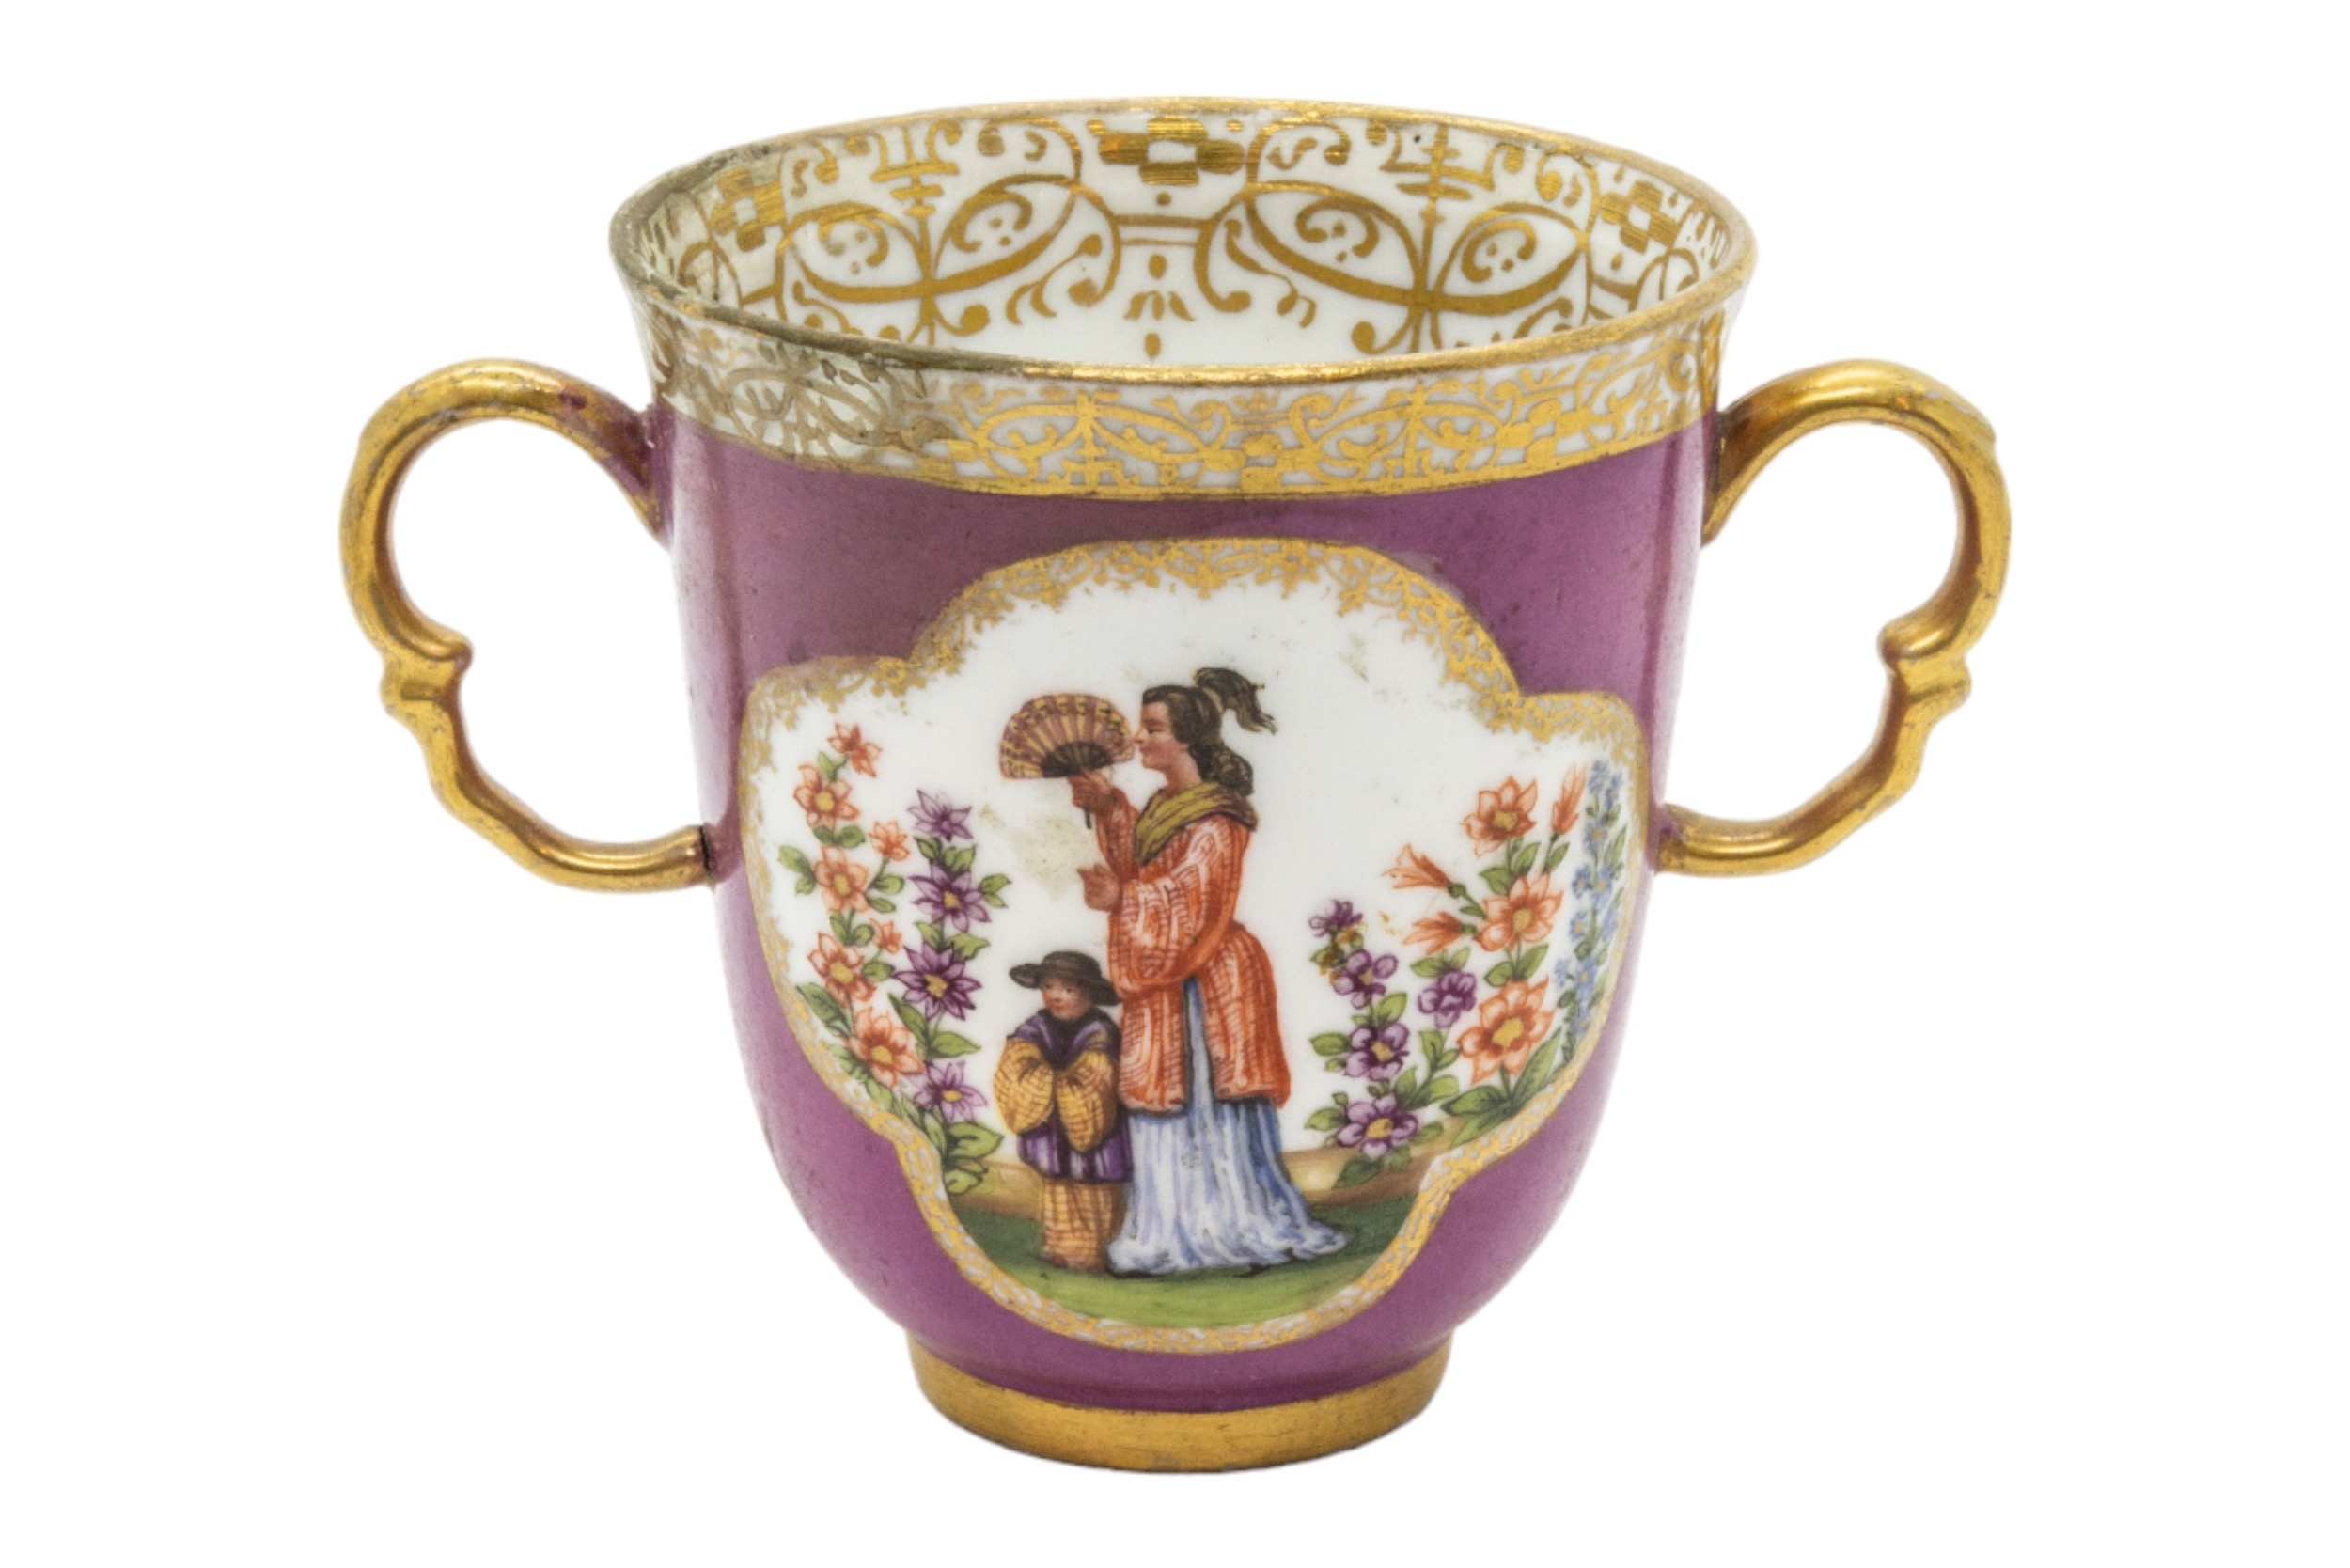 A HELENA WOLFSON CHOCOLATE CUP 19th century, together with a single cup, 13cms high. - Image 2 of 4